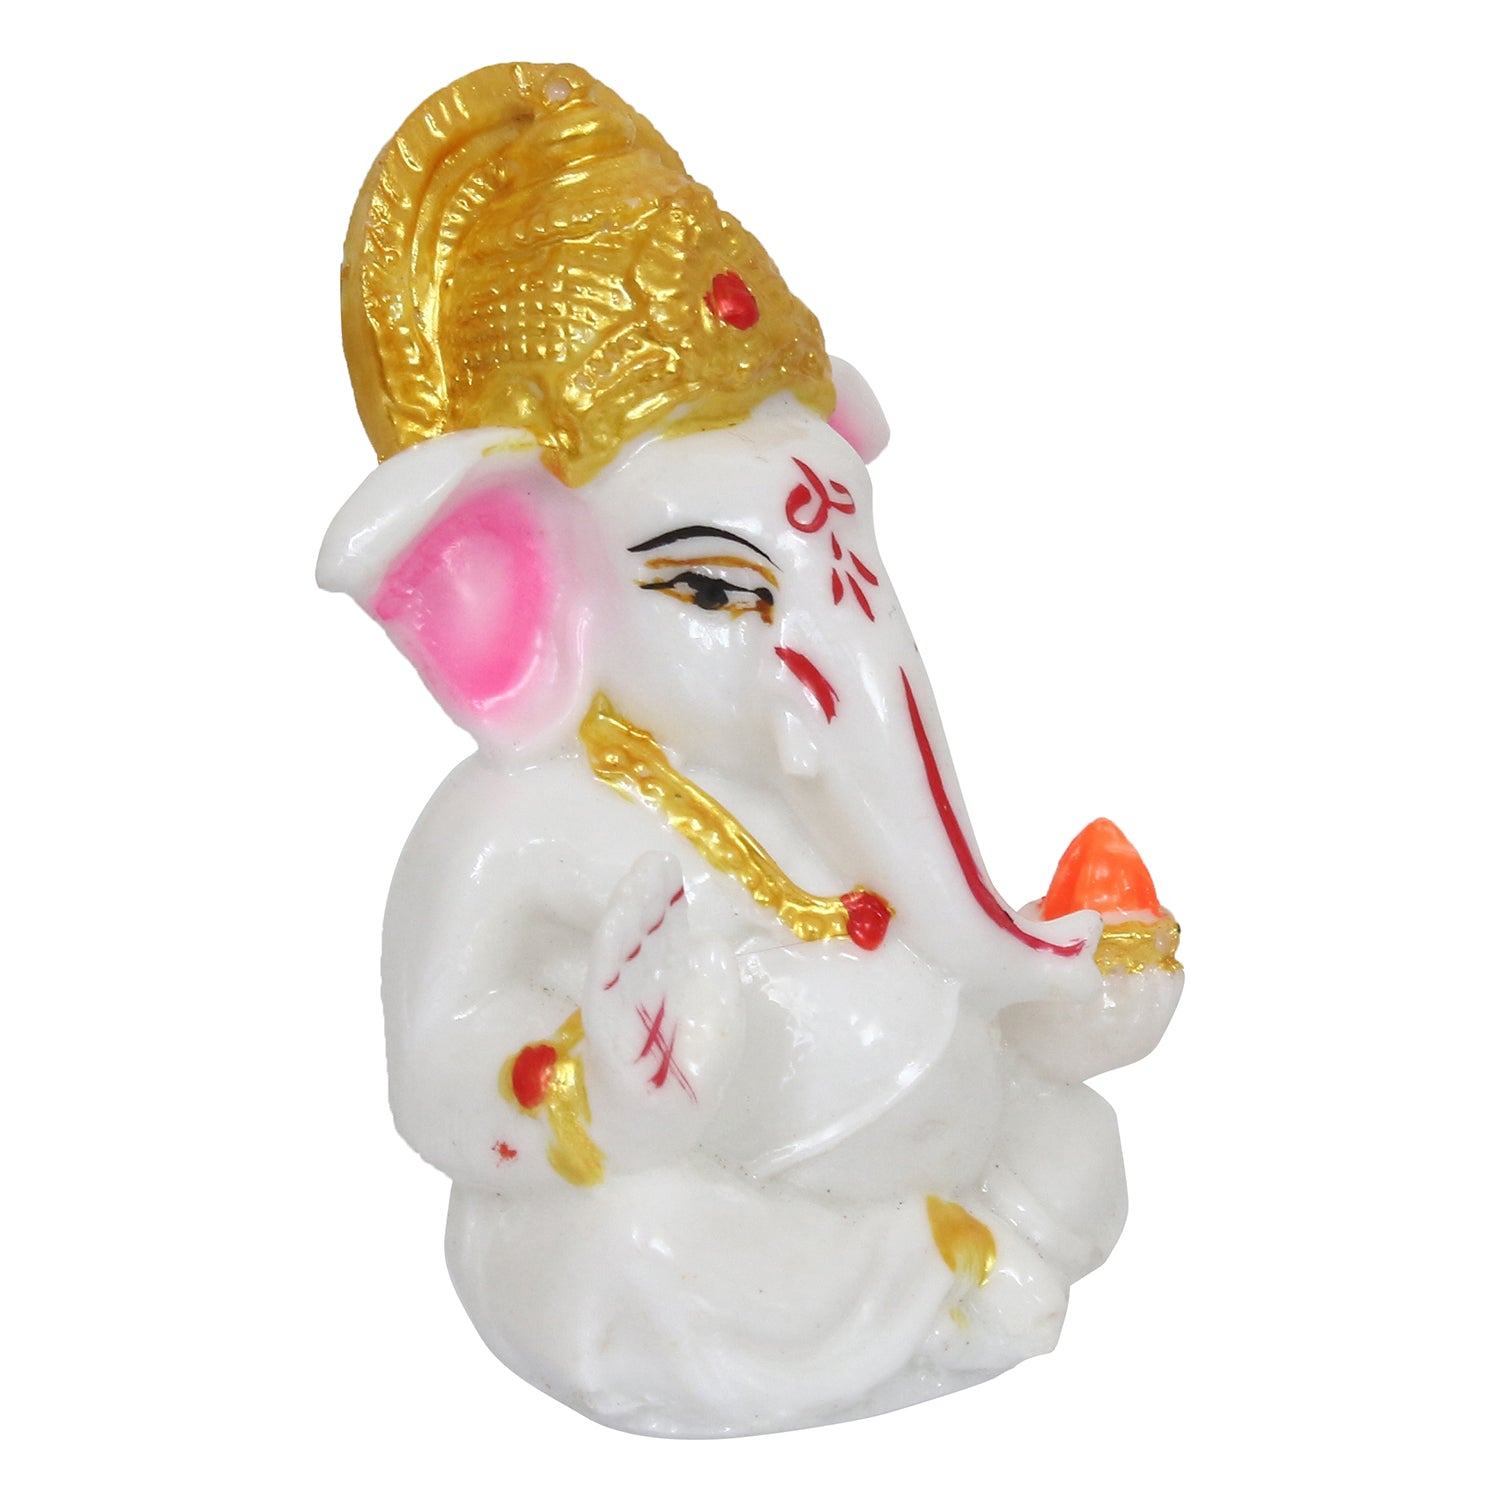 Decorative Lord Ganesha Idol for Car Dashboard, Home Temple and Office Desks 4